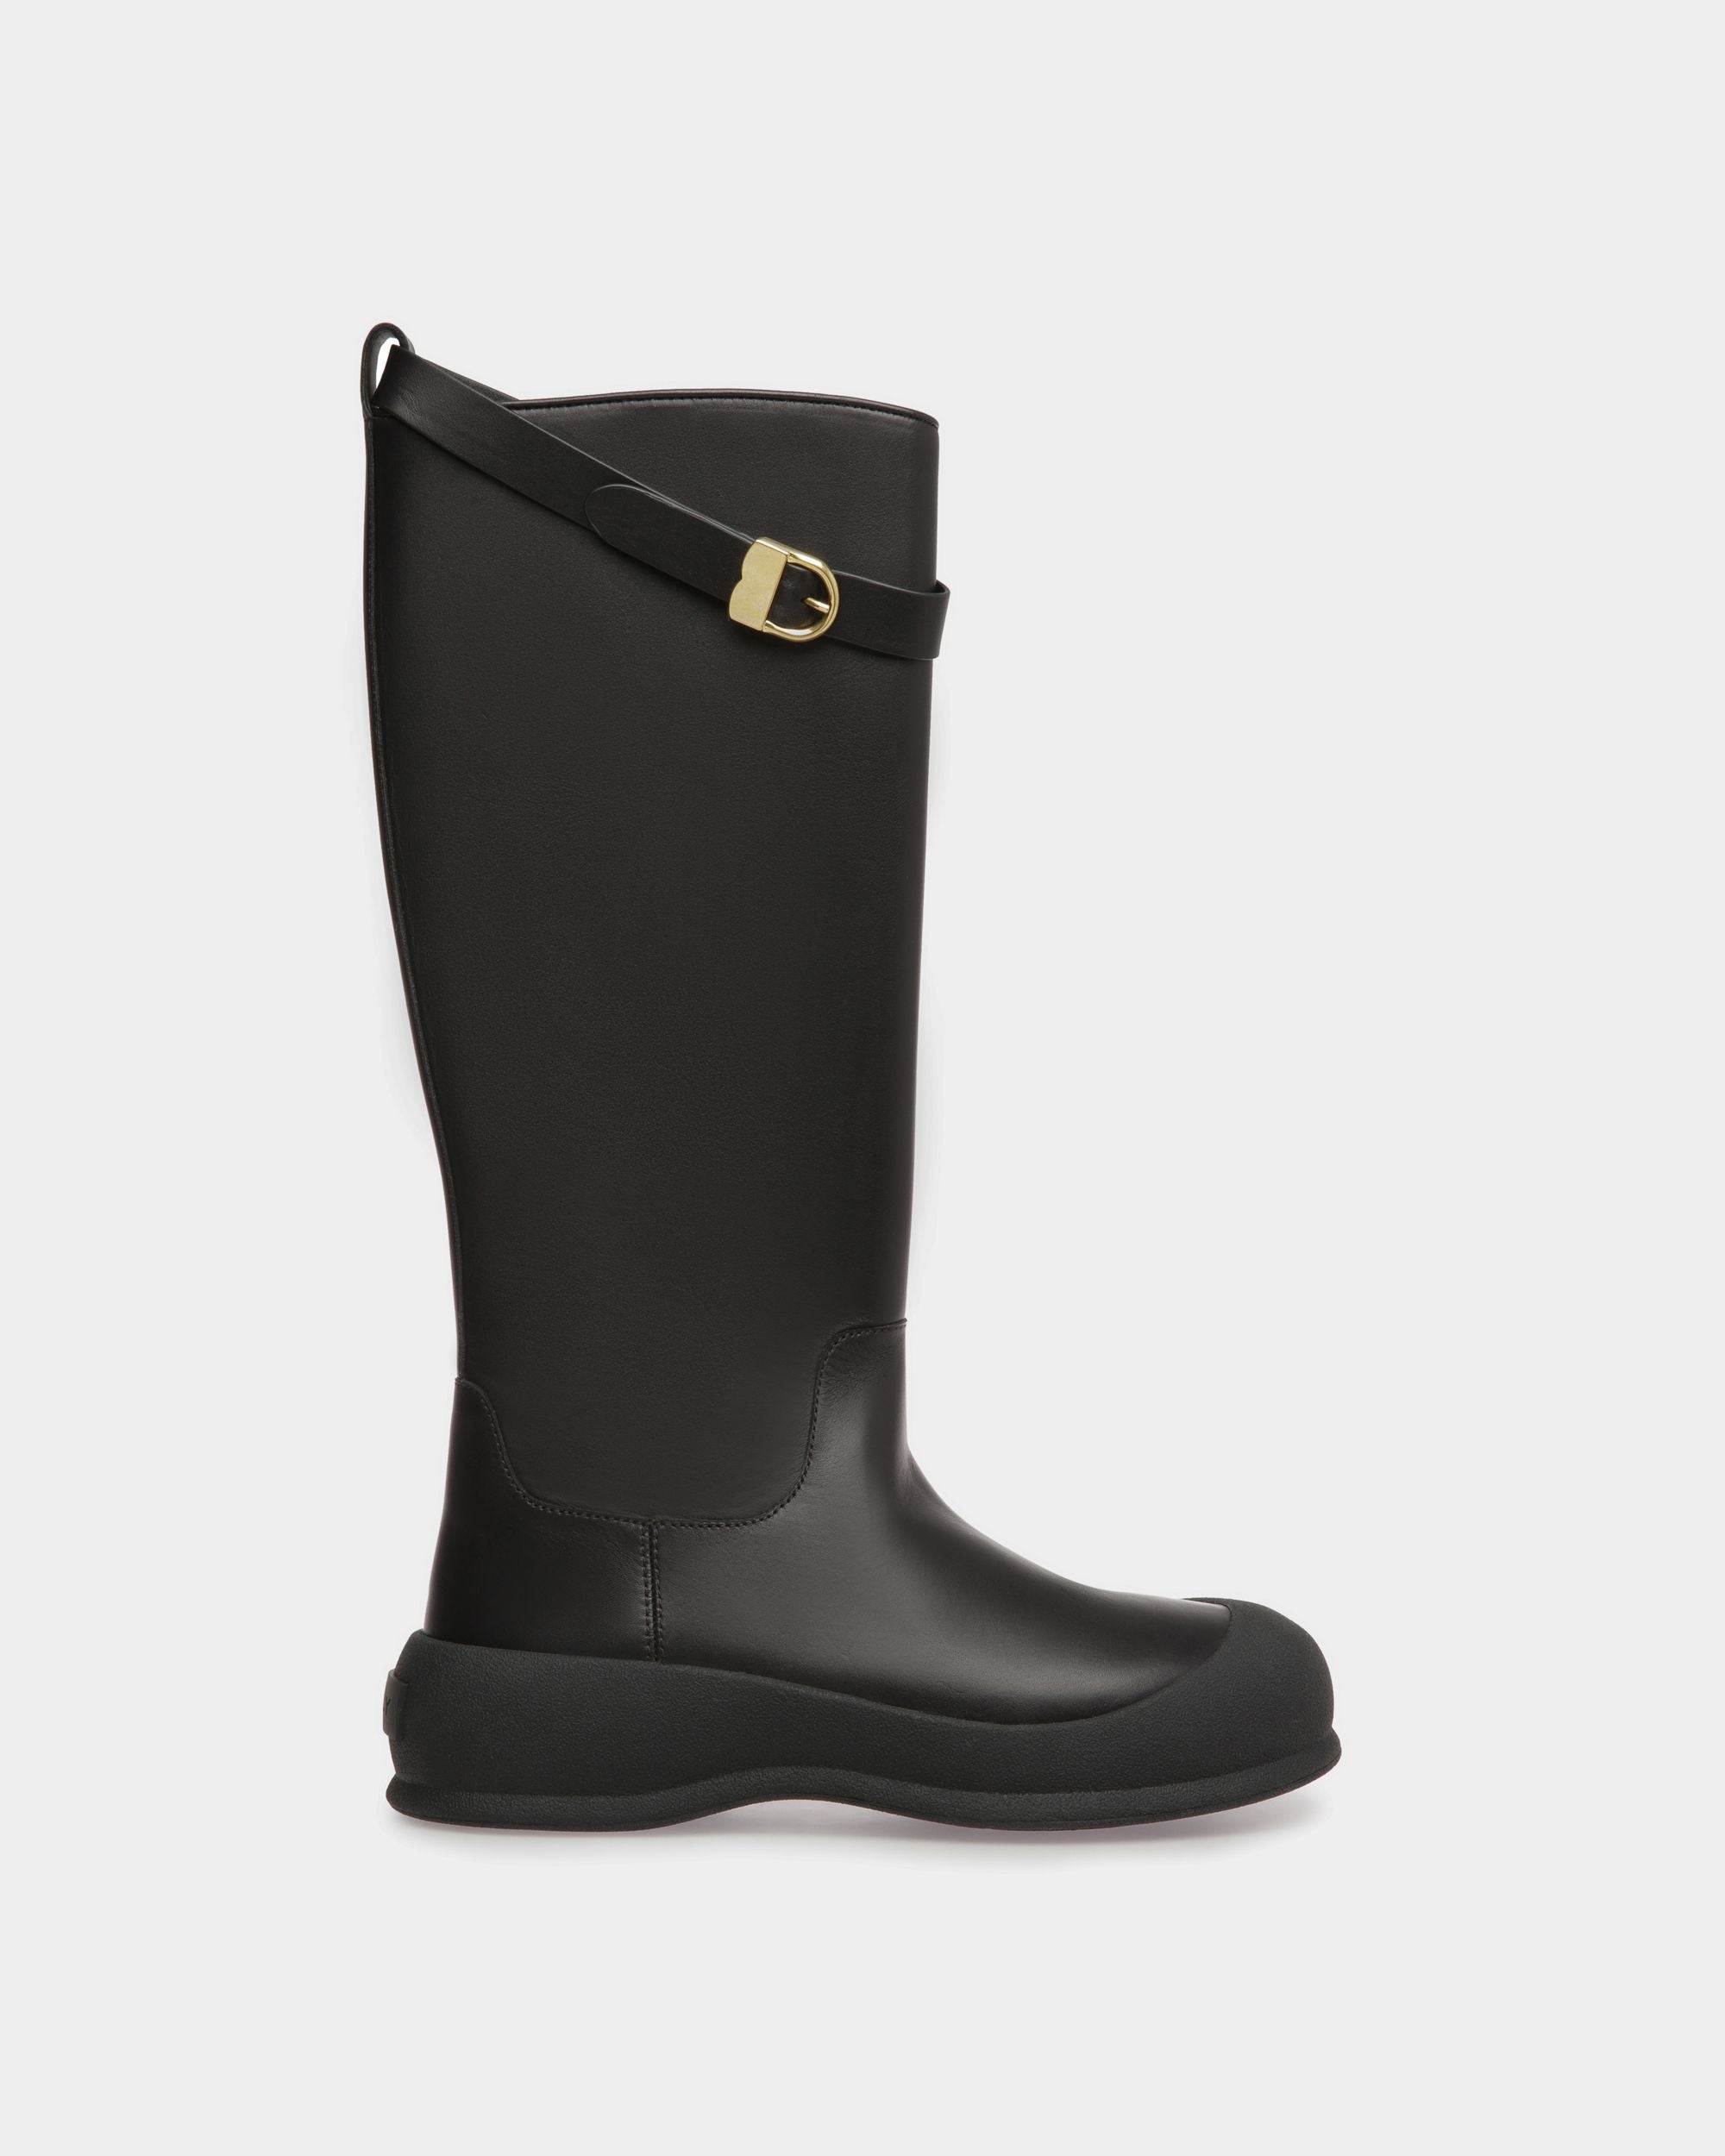 Clyve | Women's Boots | Black Leather | Bally | Still Life Side